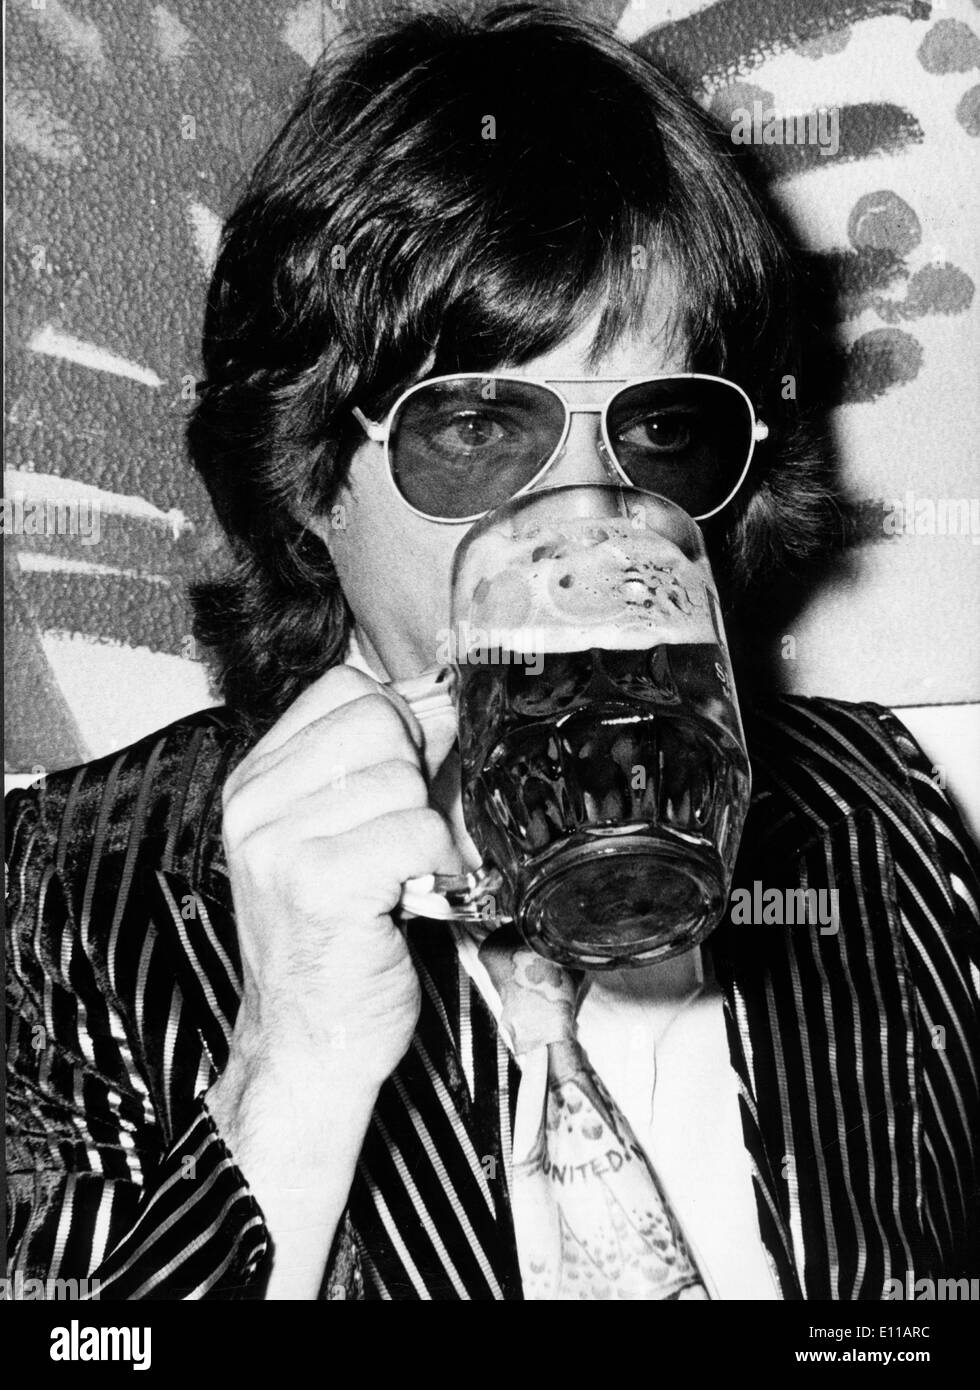 Rolling Stones singer Mick Jagger drinks a beer Stock Photo